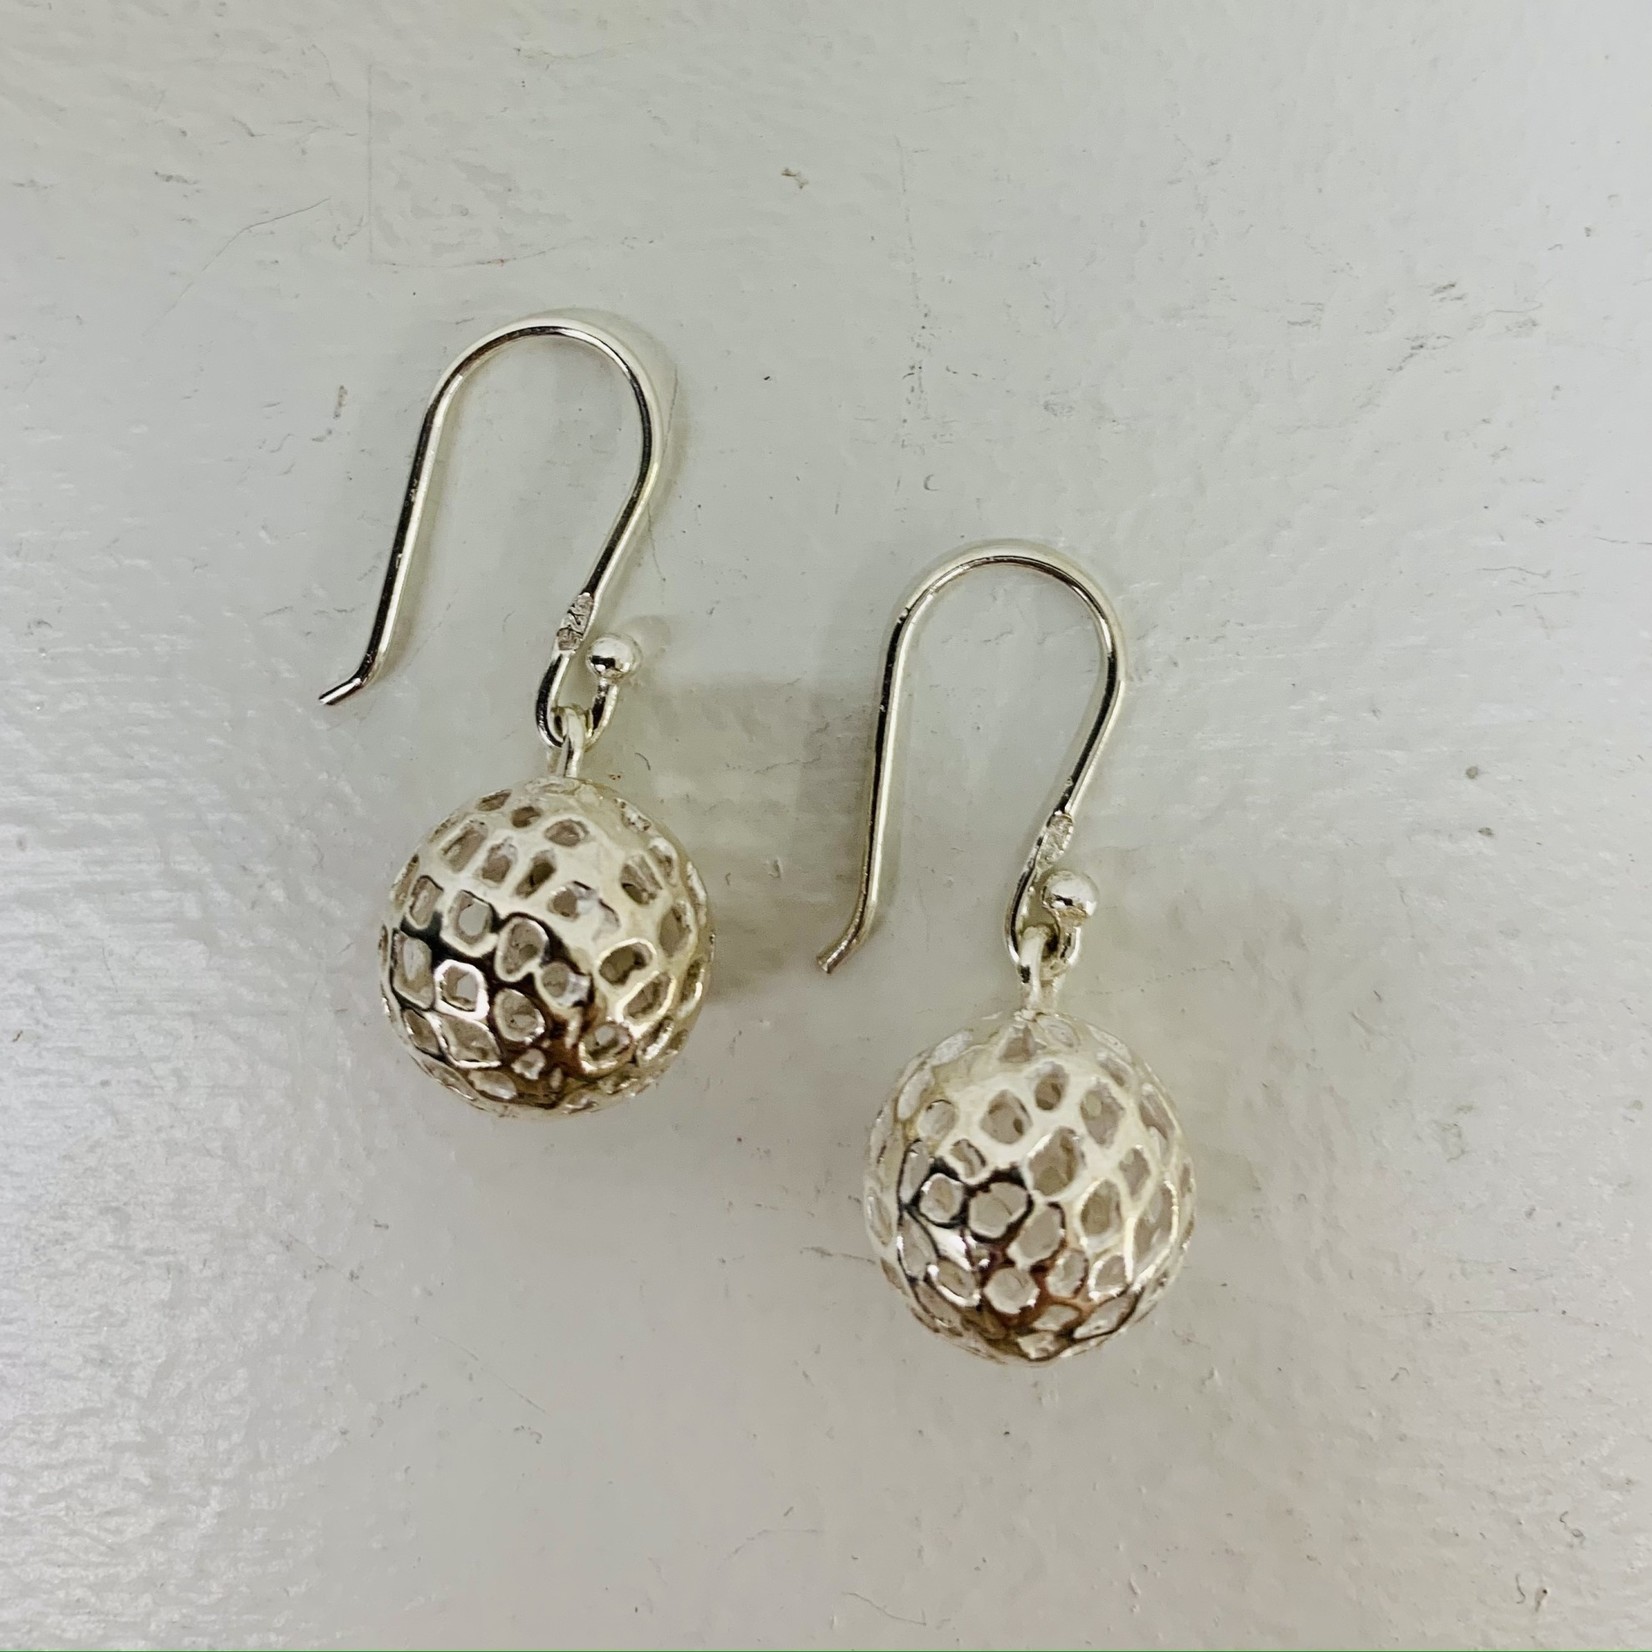 Ten Thousand Villages Silver Wired Ball Drop Earring